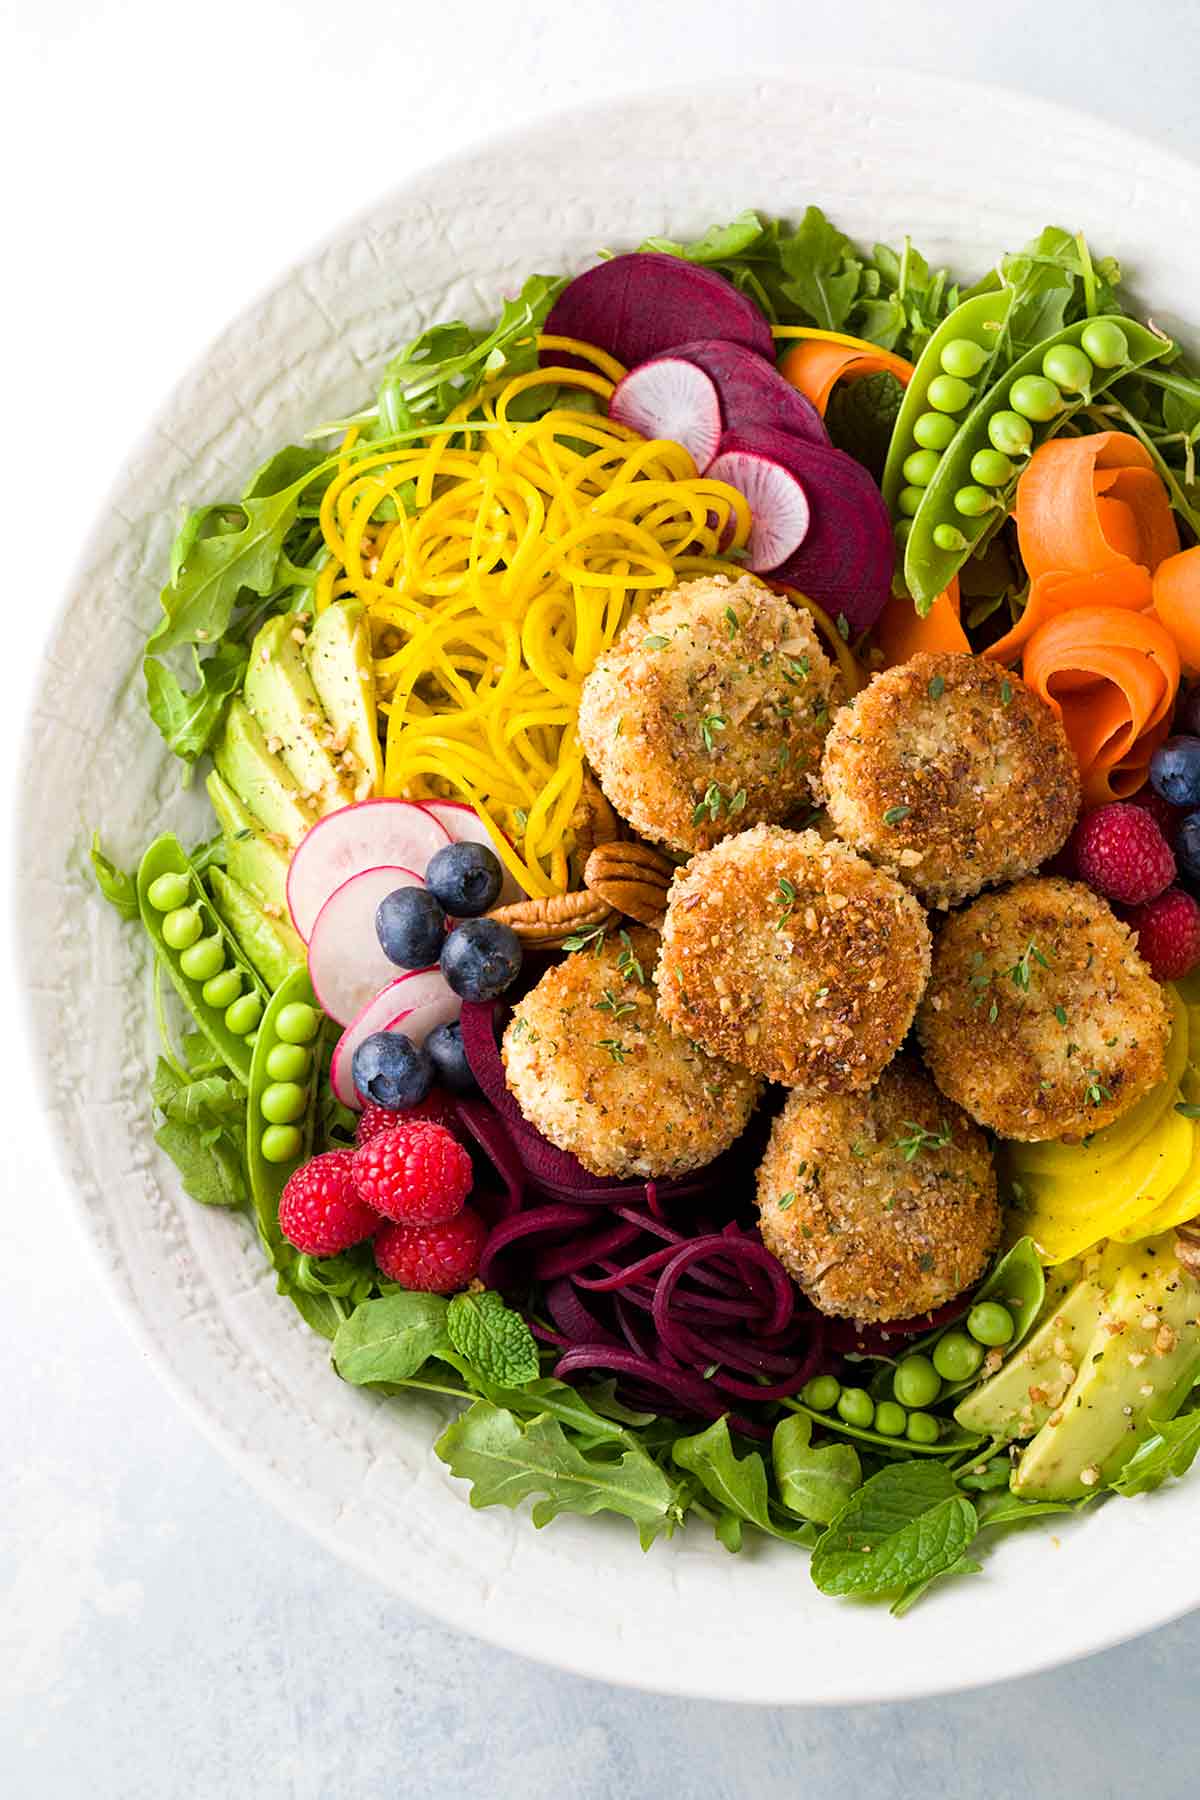 Crispy and delicious fried goat cheese salad recipe with fresh veggies, arugula, beets, carrots, peas, avocado and raspberry poppy seed sauce. | takeoutfood.best